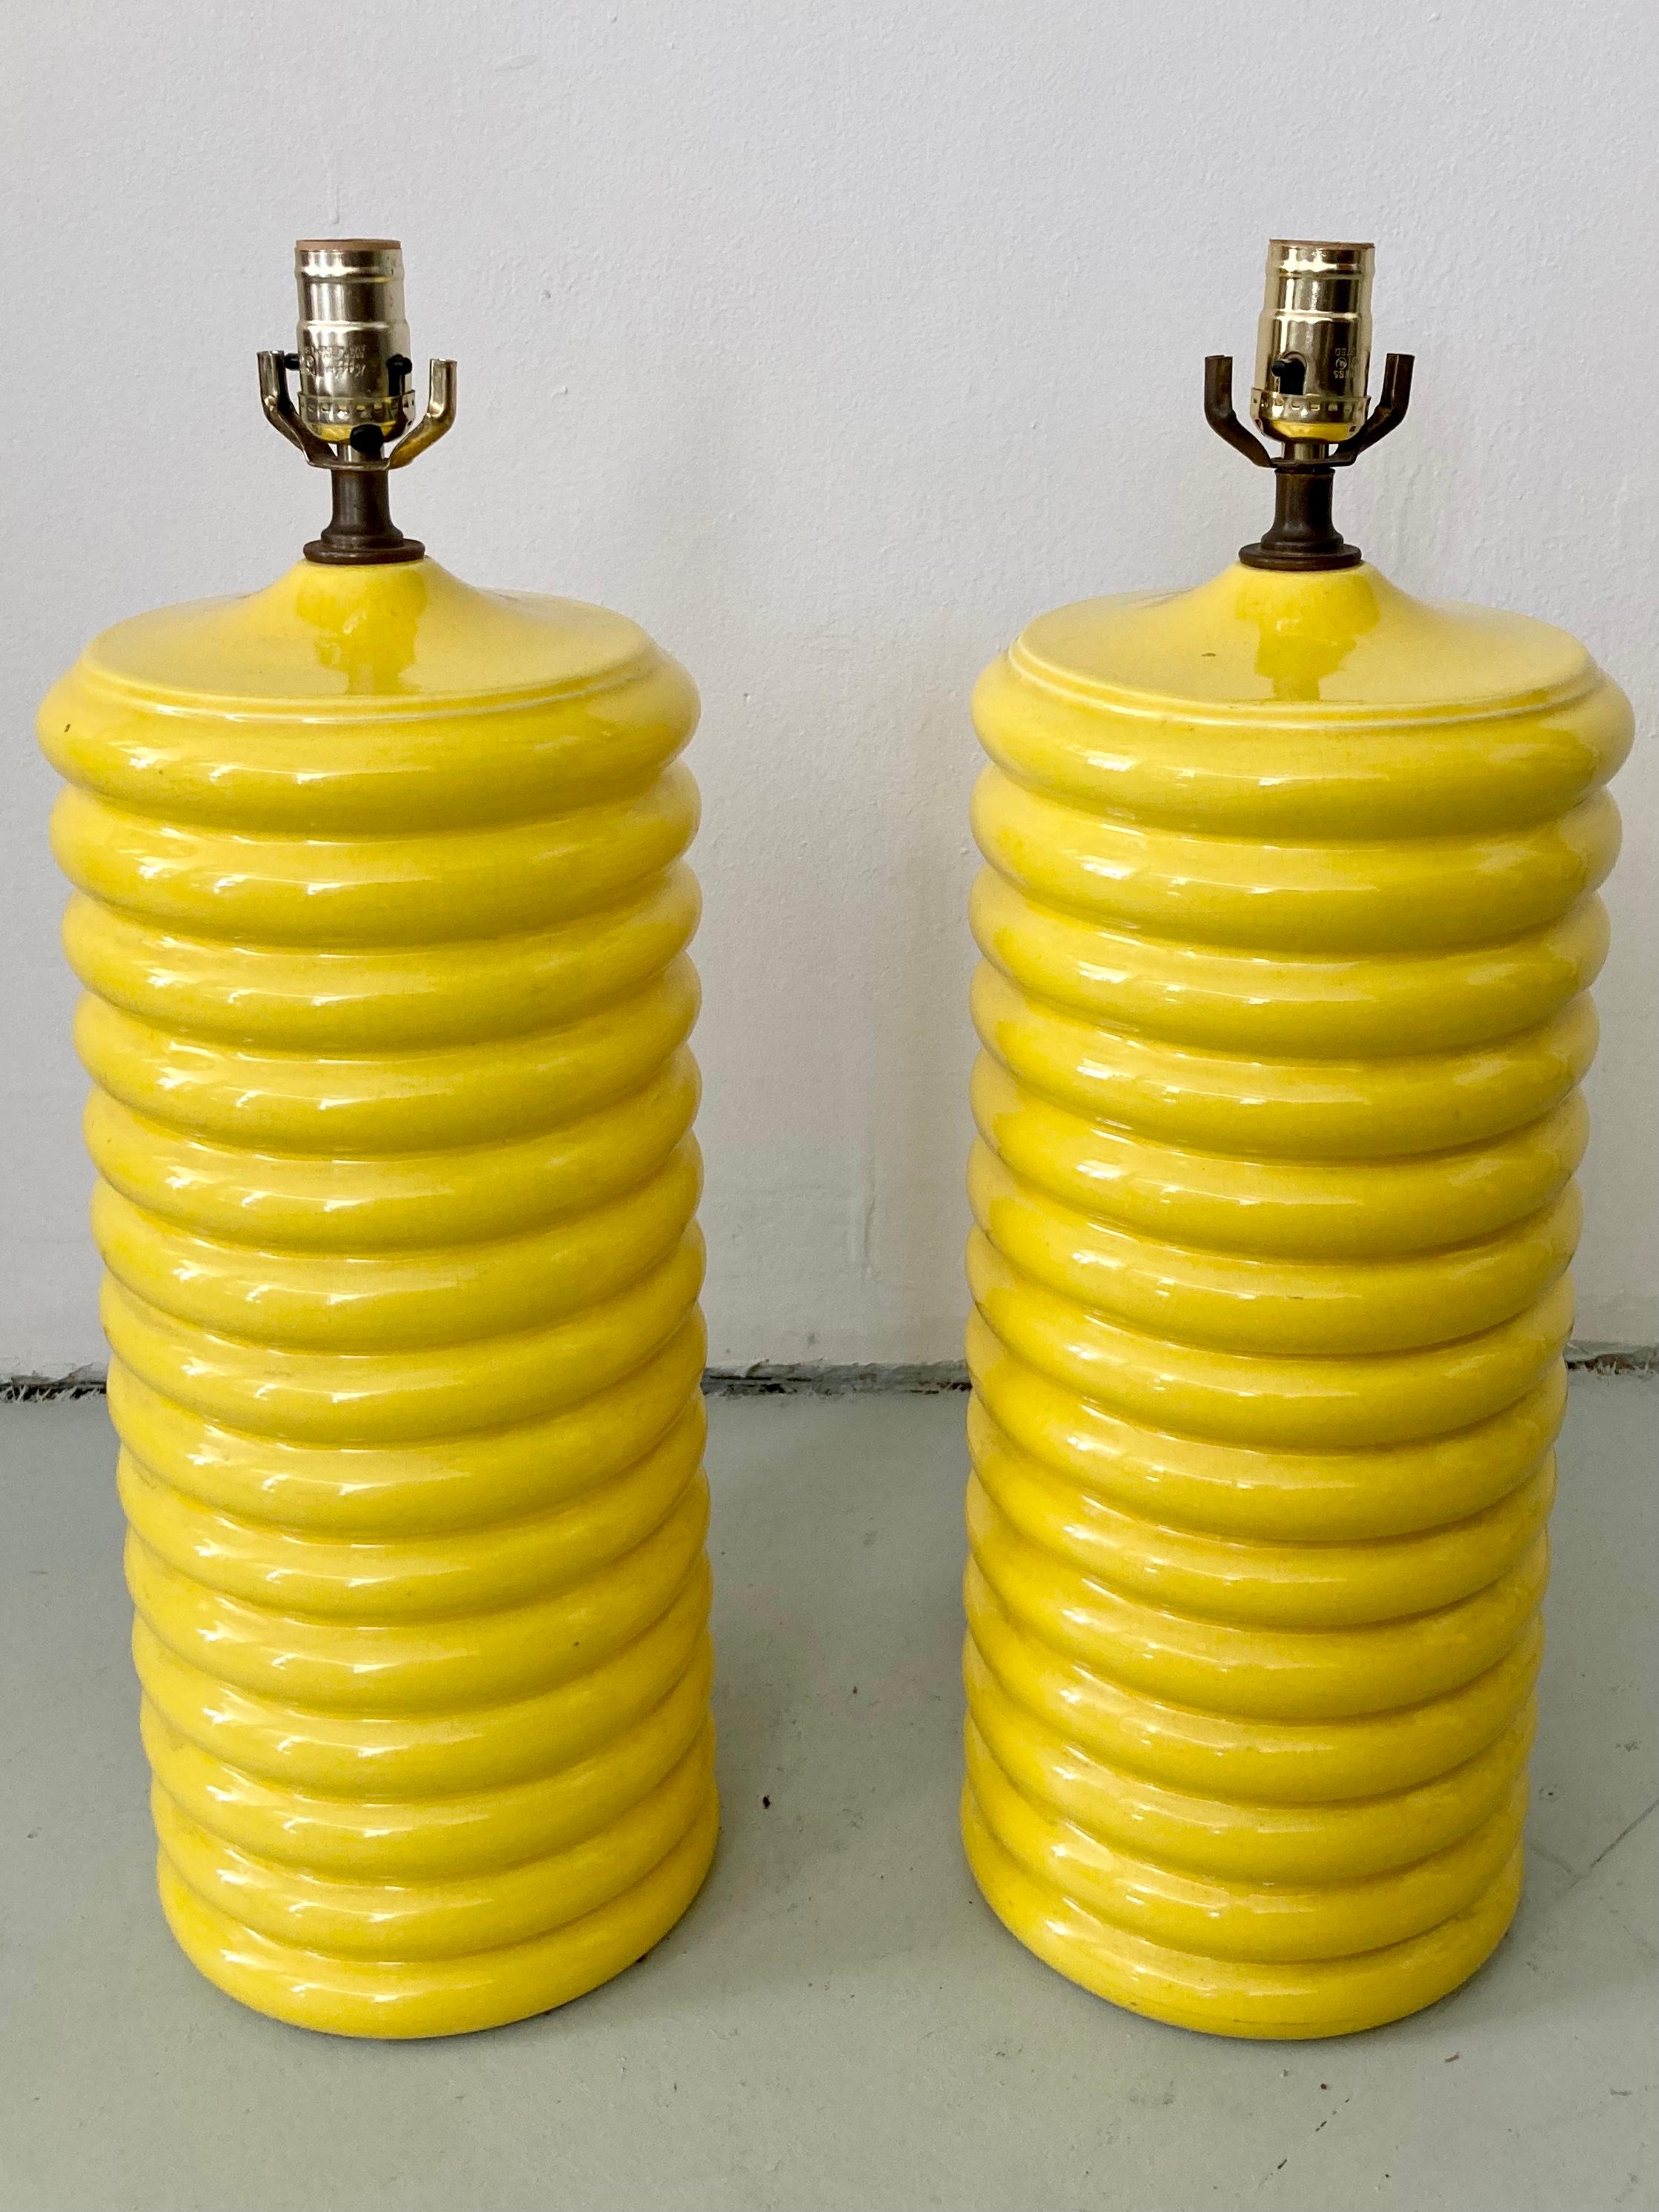 Fun pair of modern yellow glazed ceramic table lamps. Great addition to your boho chic inspired interiors.